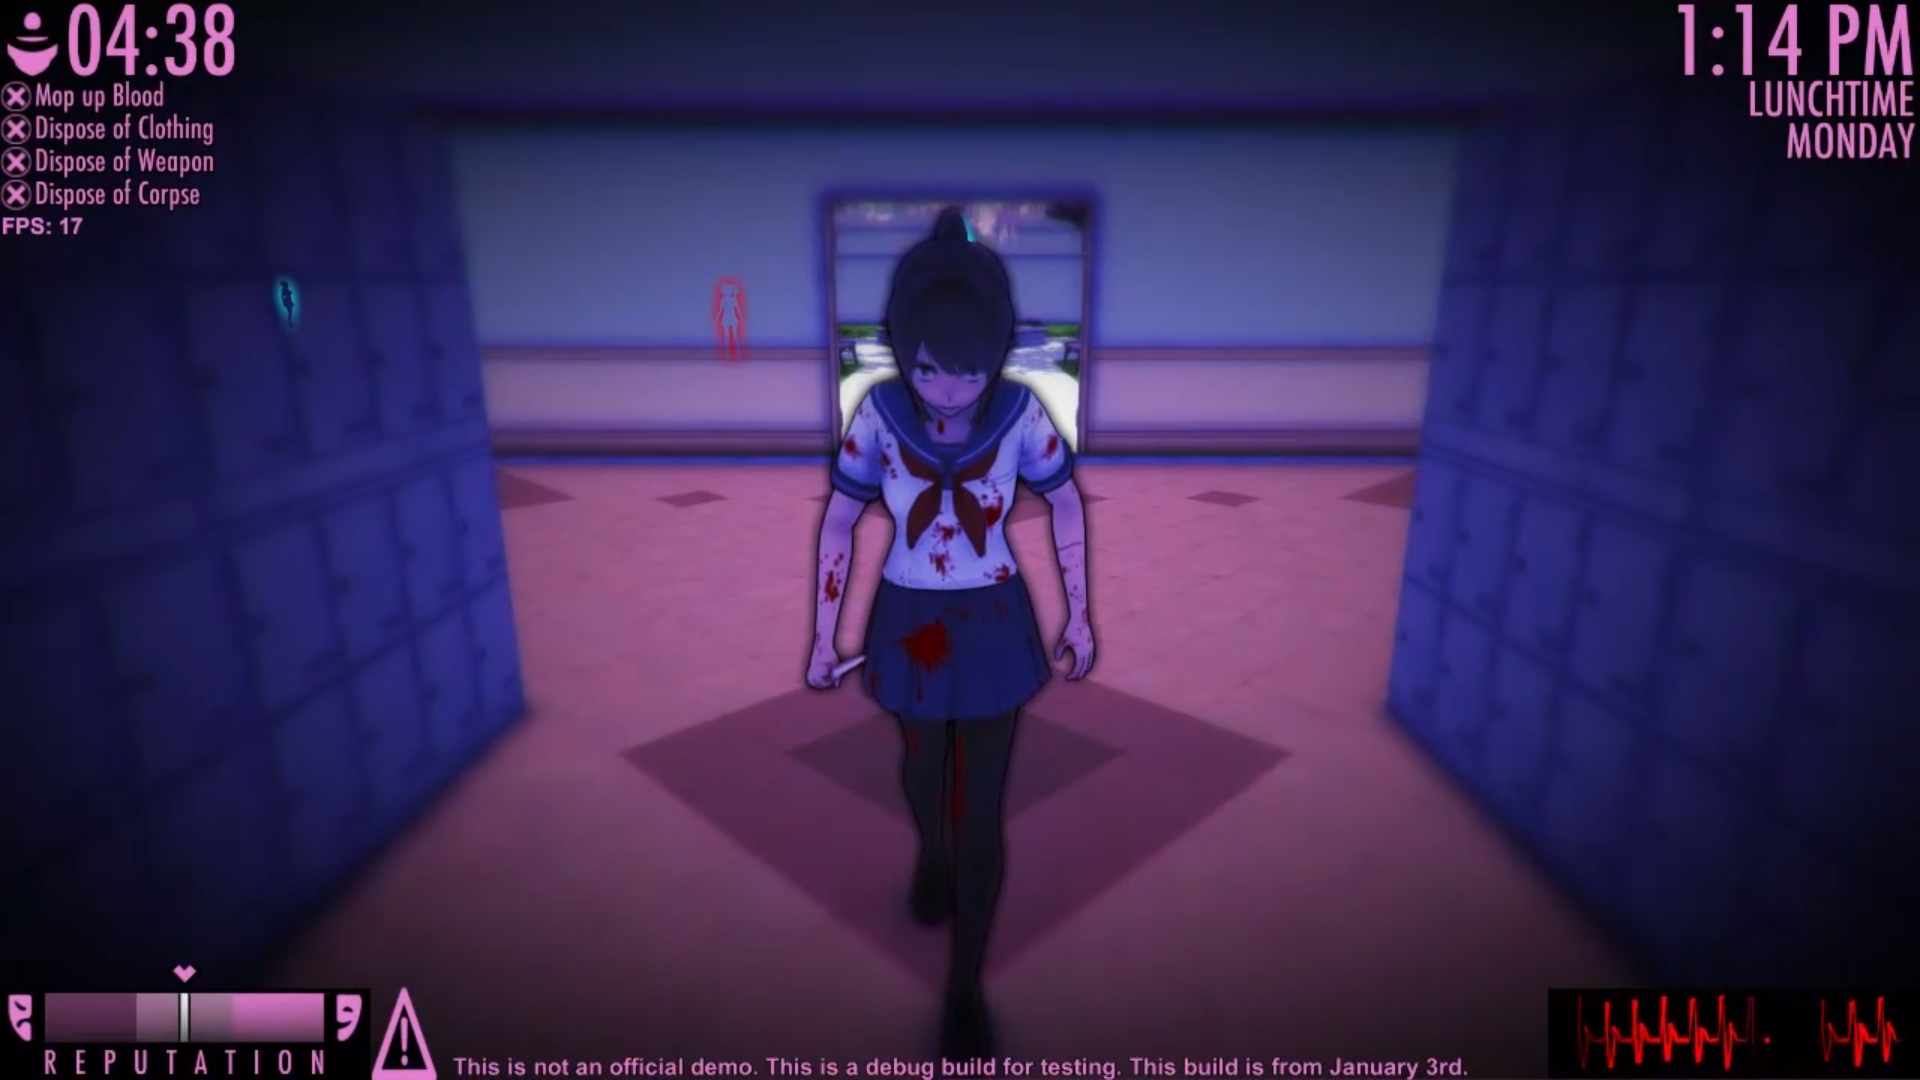 Yandere Simulator Becomes The Latest Game Banned From Twitch